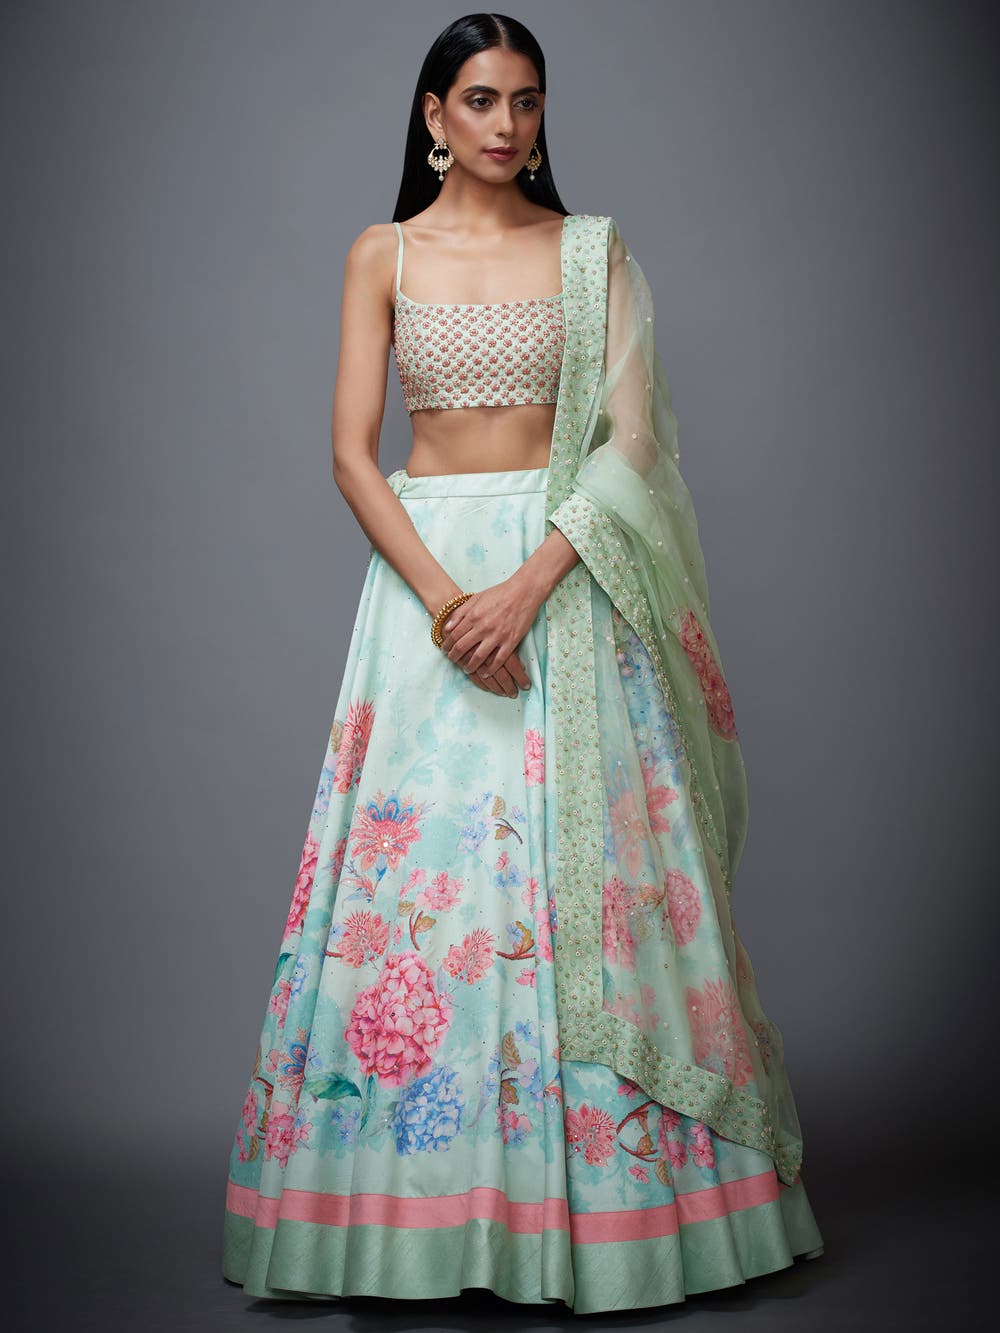 Ritu Kumar - The RI Ritu Kumar] collection this season exudes femininity  and charm of the Indian bride. There is a marked juxtaposition between Ritu  Kumar classic silhouettes and newer more playful